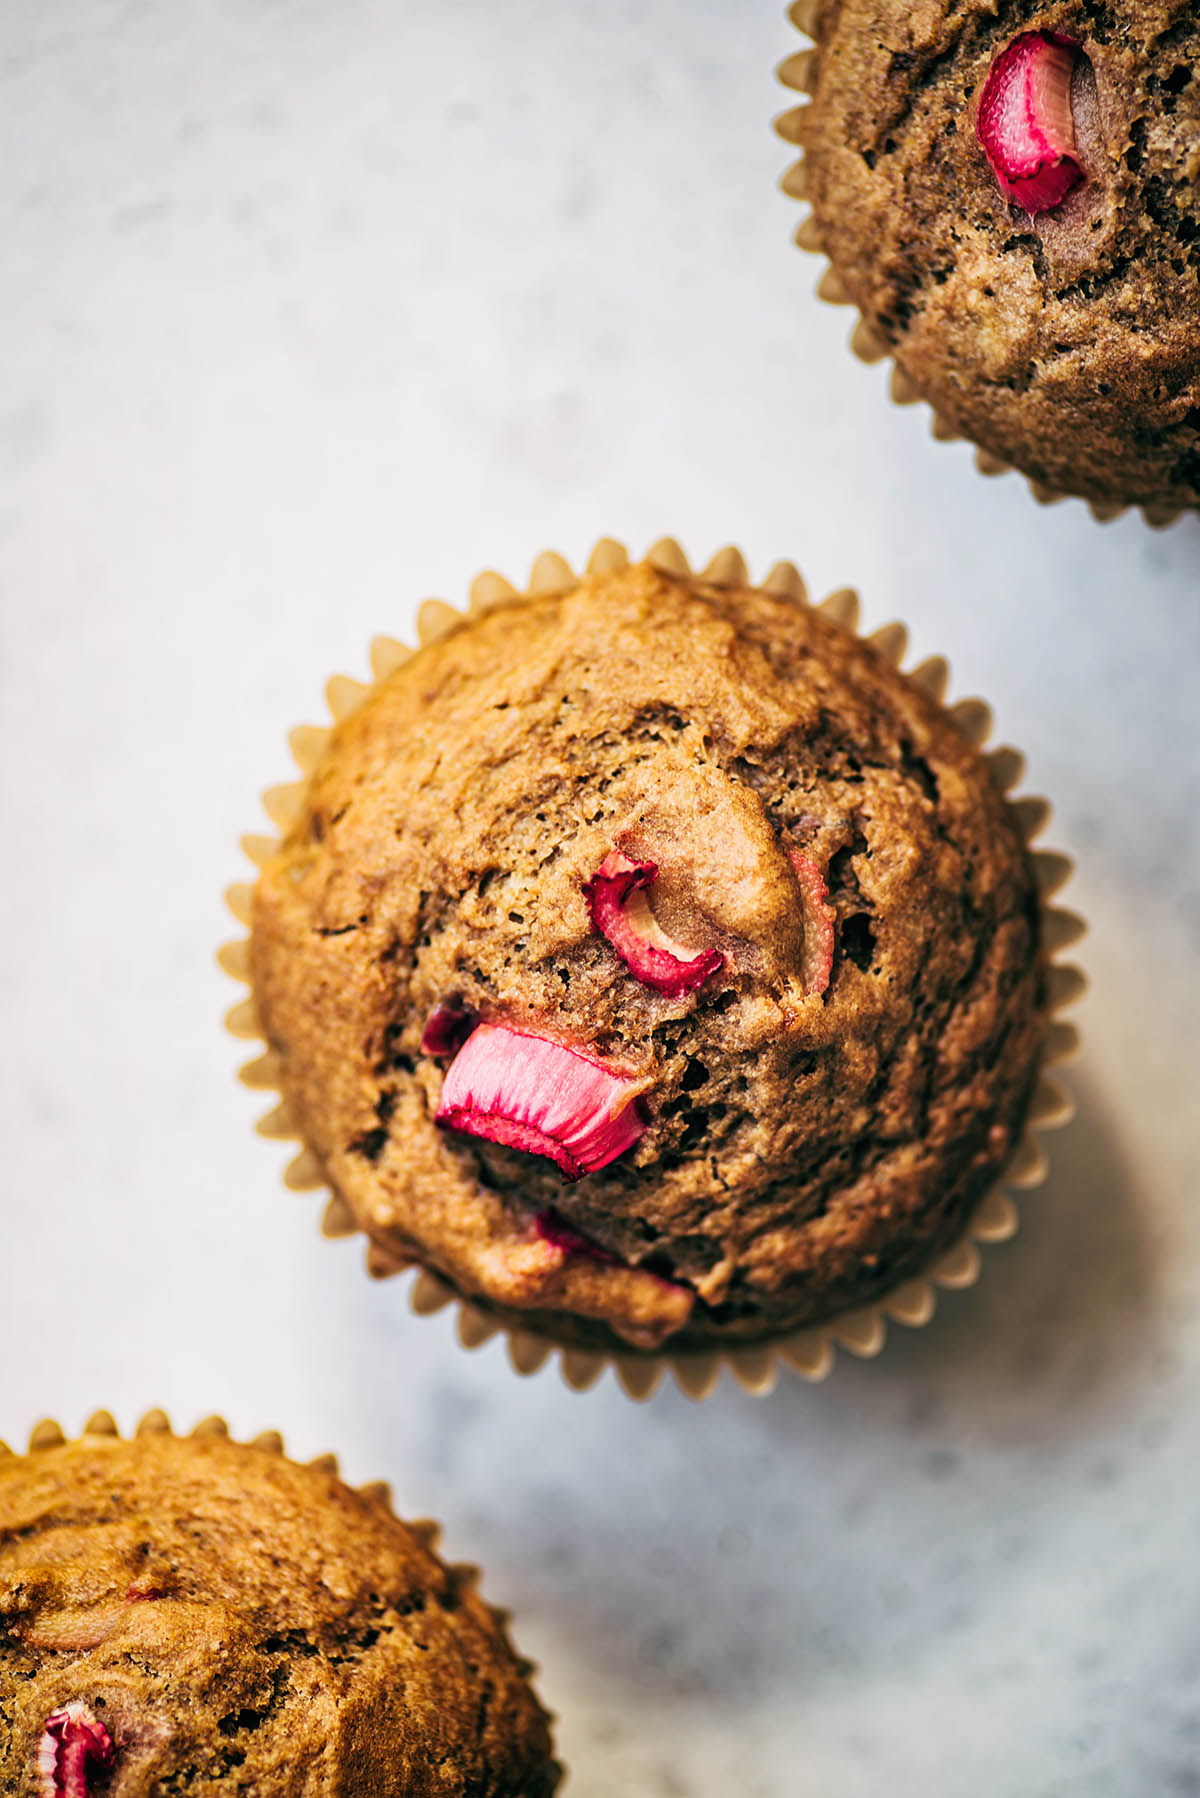 Three muffins in a diagonal row, topped with rhubarb.